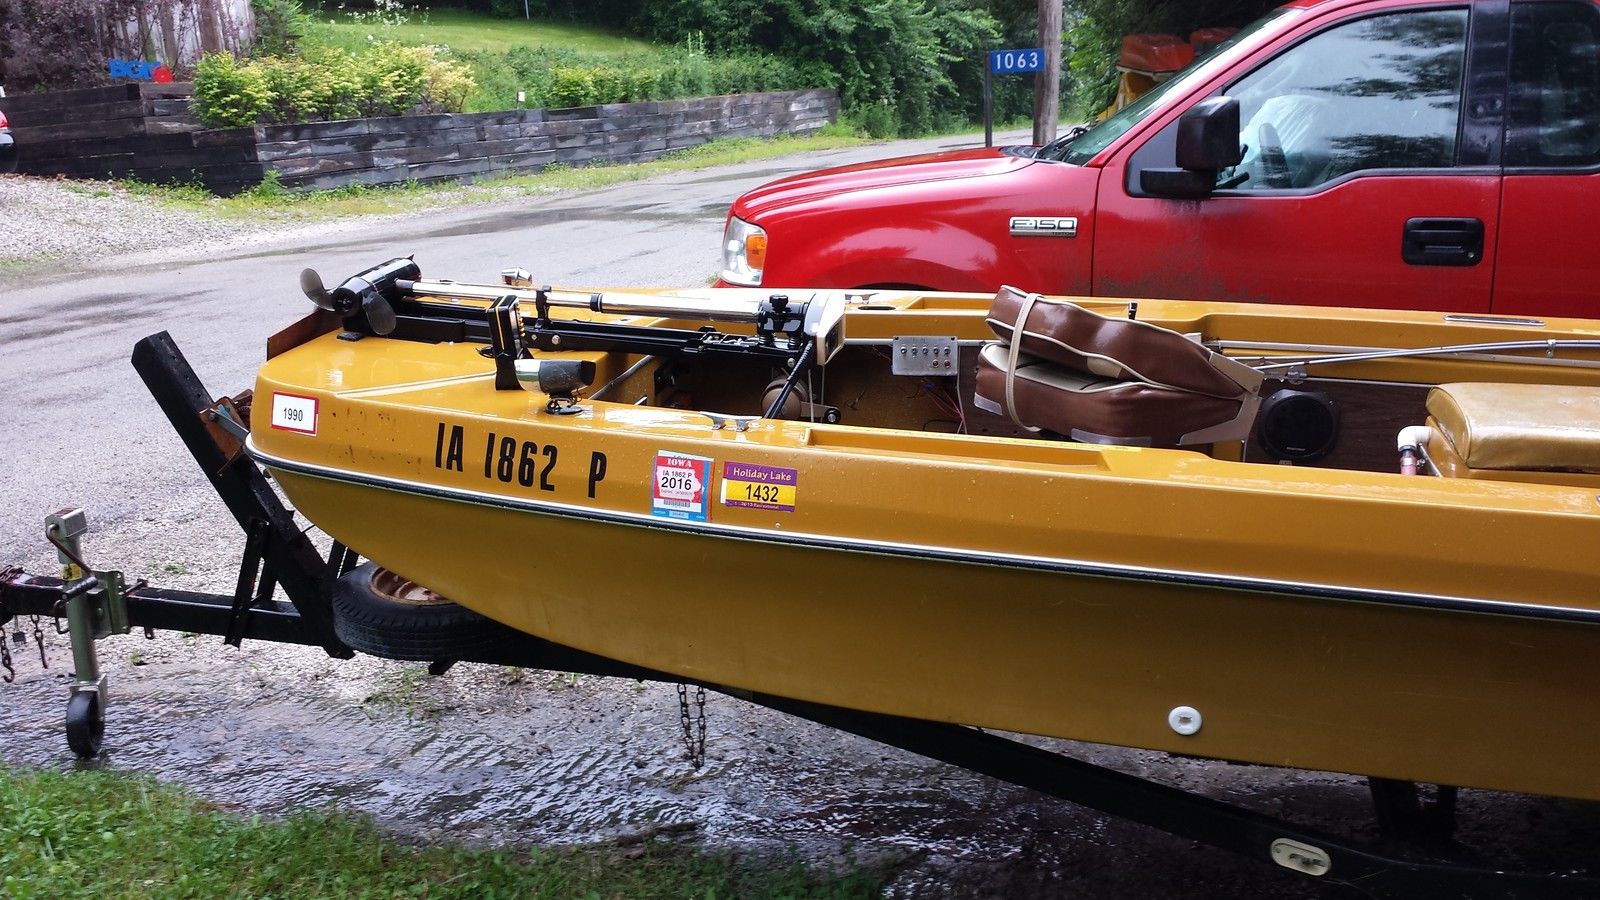 Terry Bass Boat Fishing 1975 for sale for 600 Boats